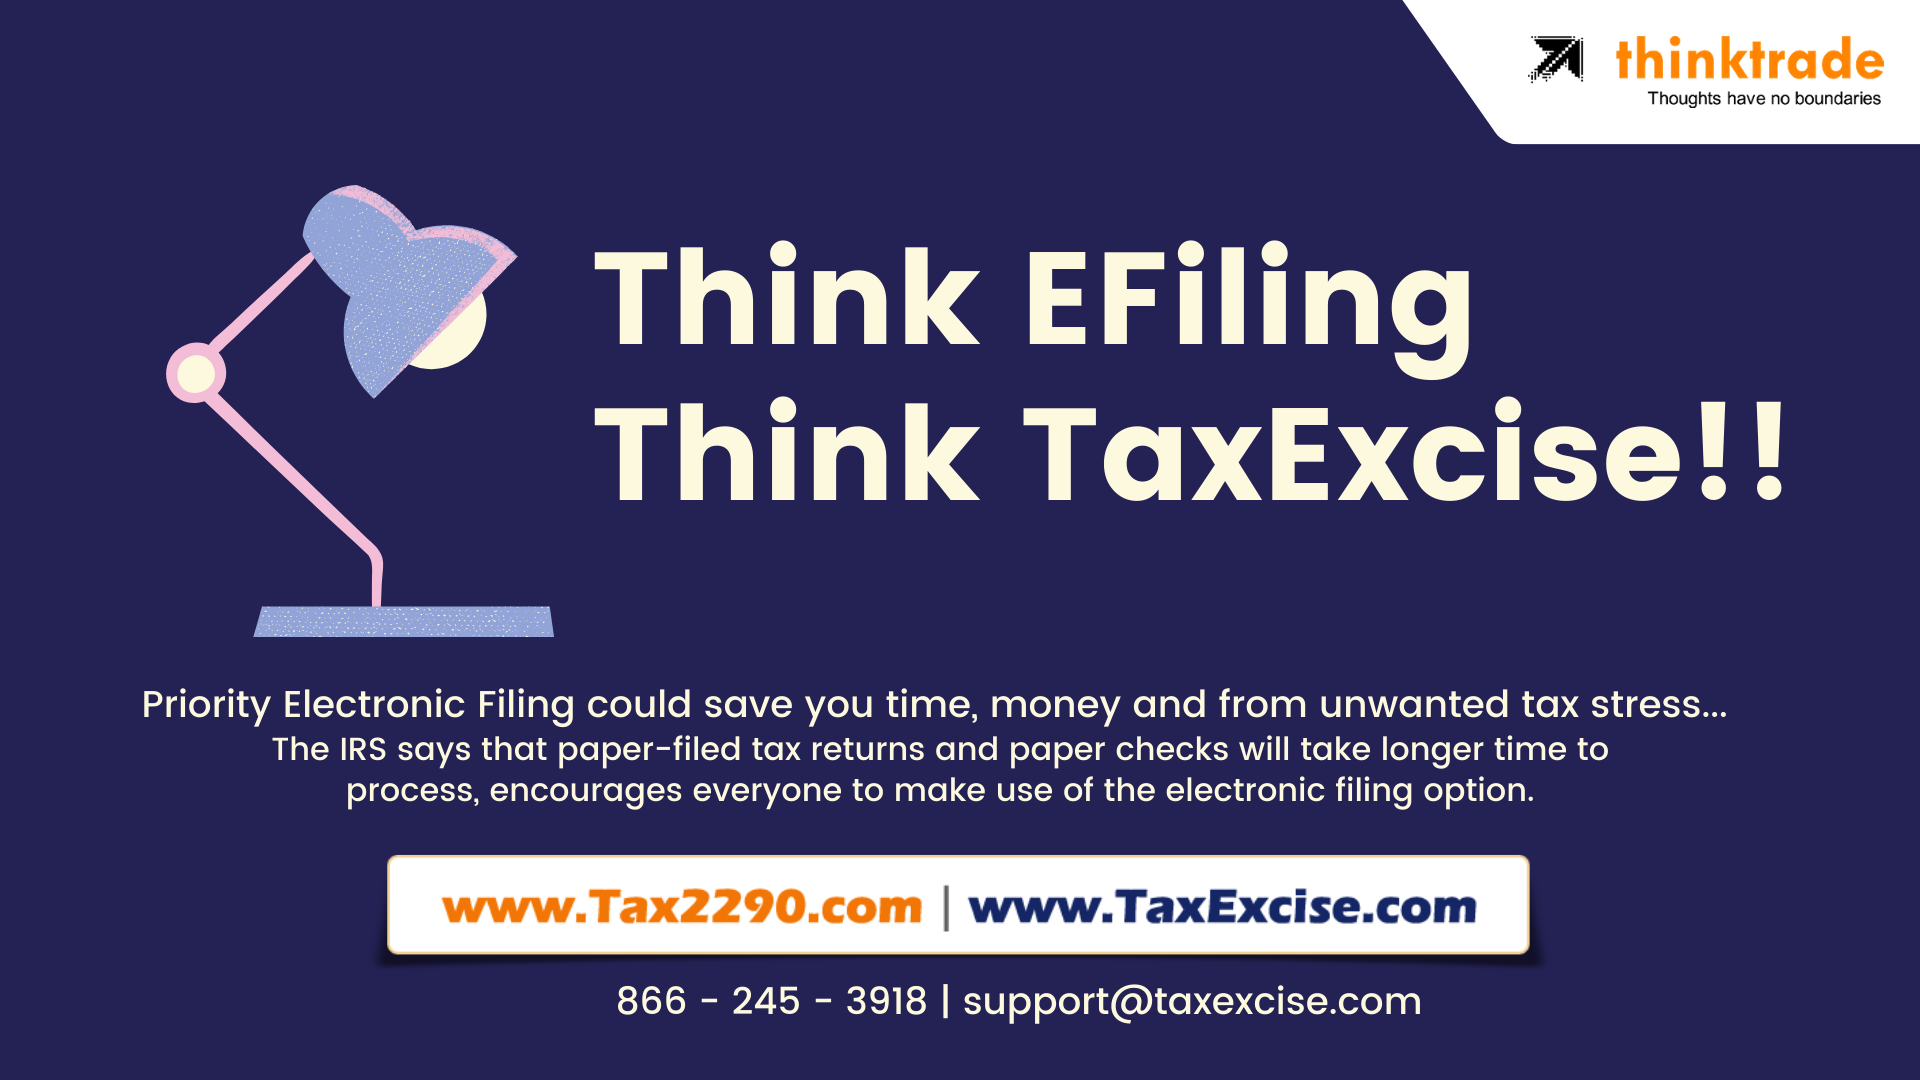 think efiling at TaxExcise